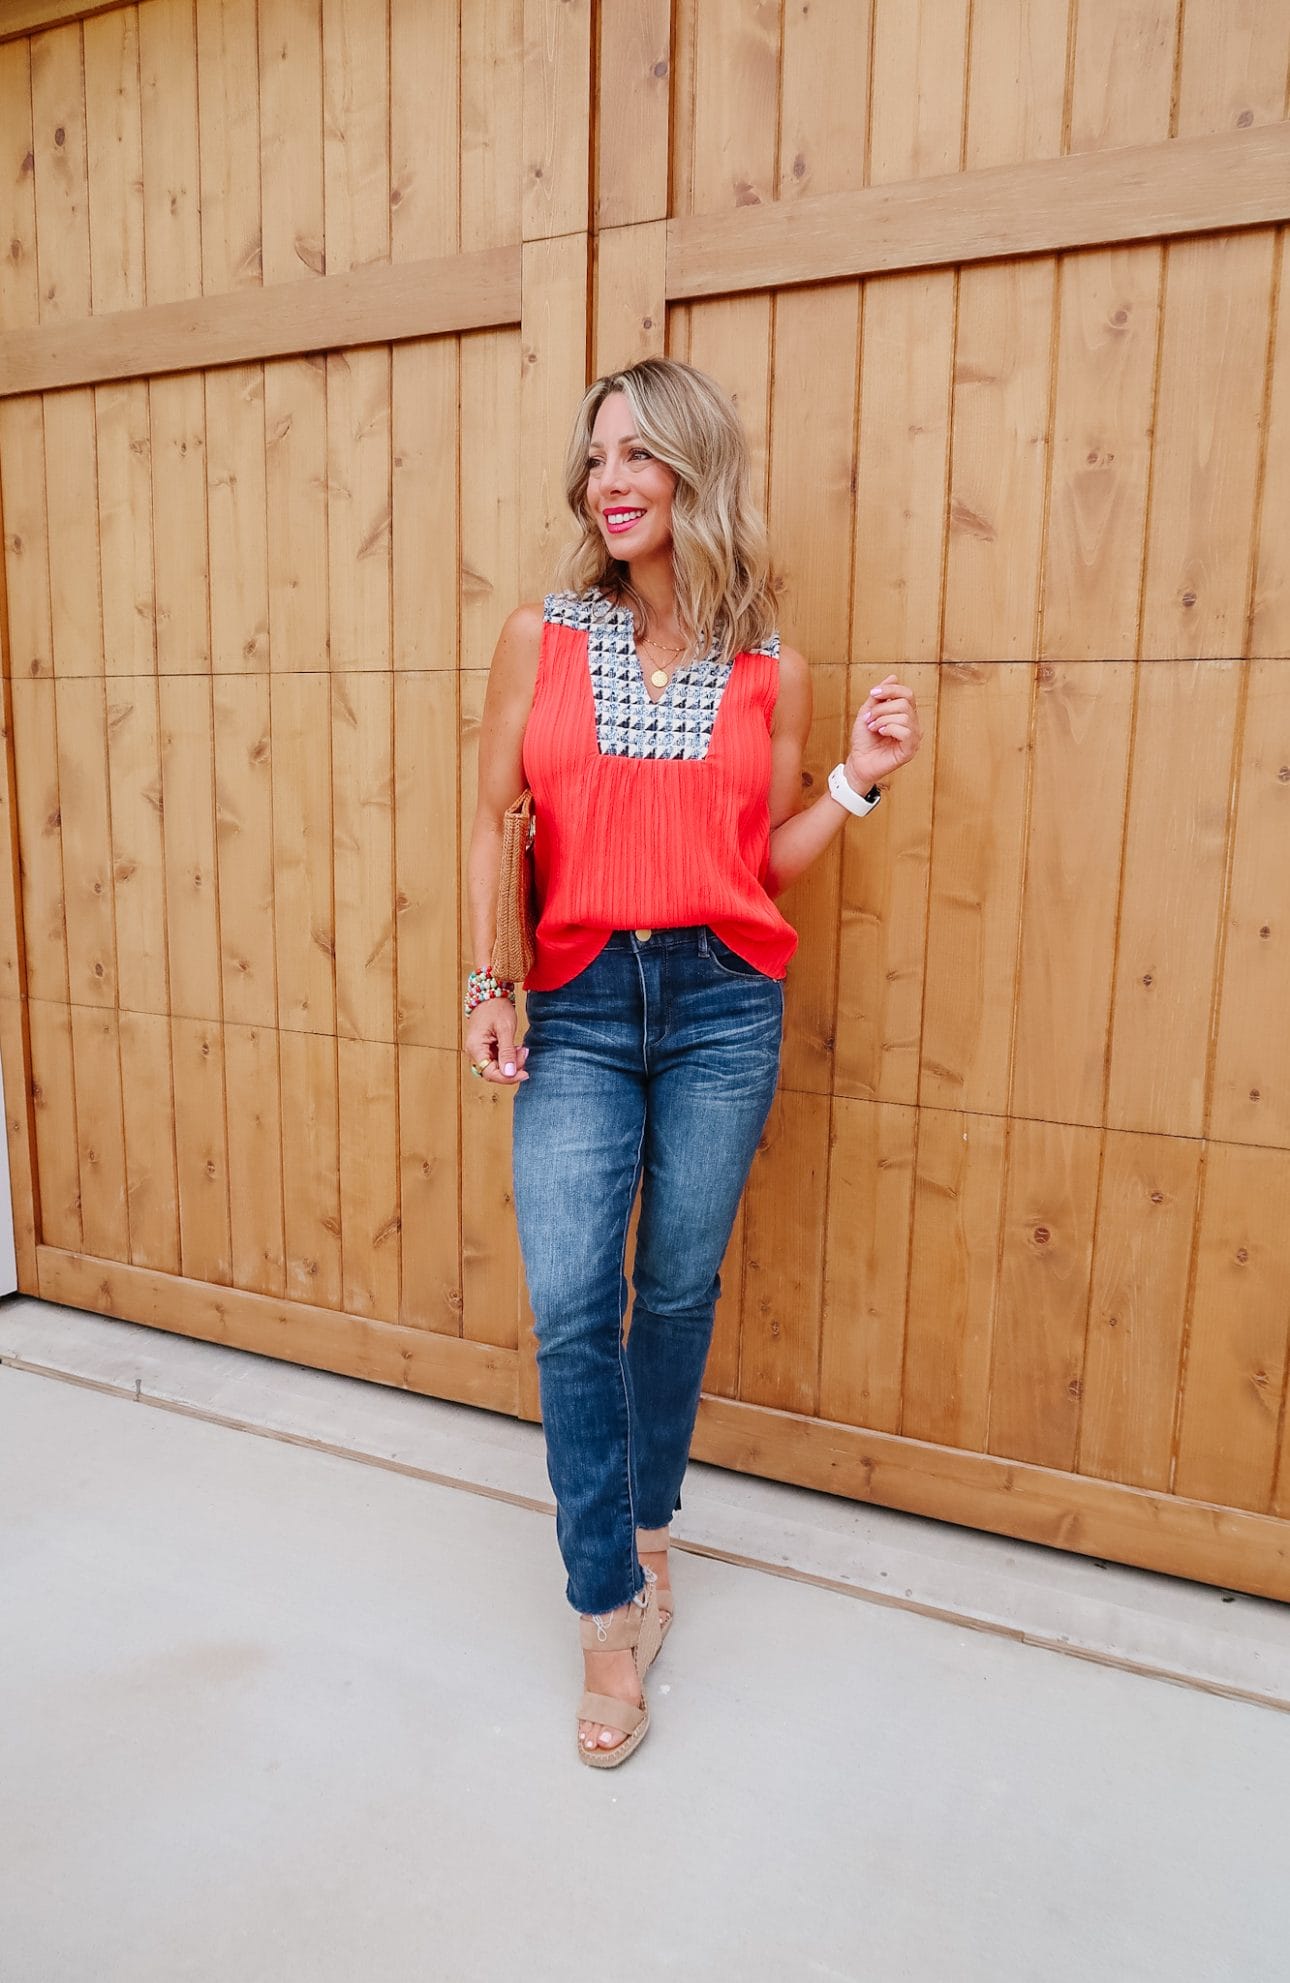 4th of July Style – Honey We're Home